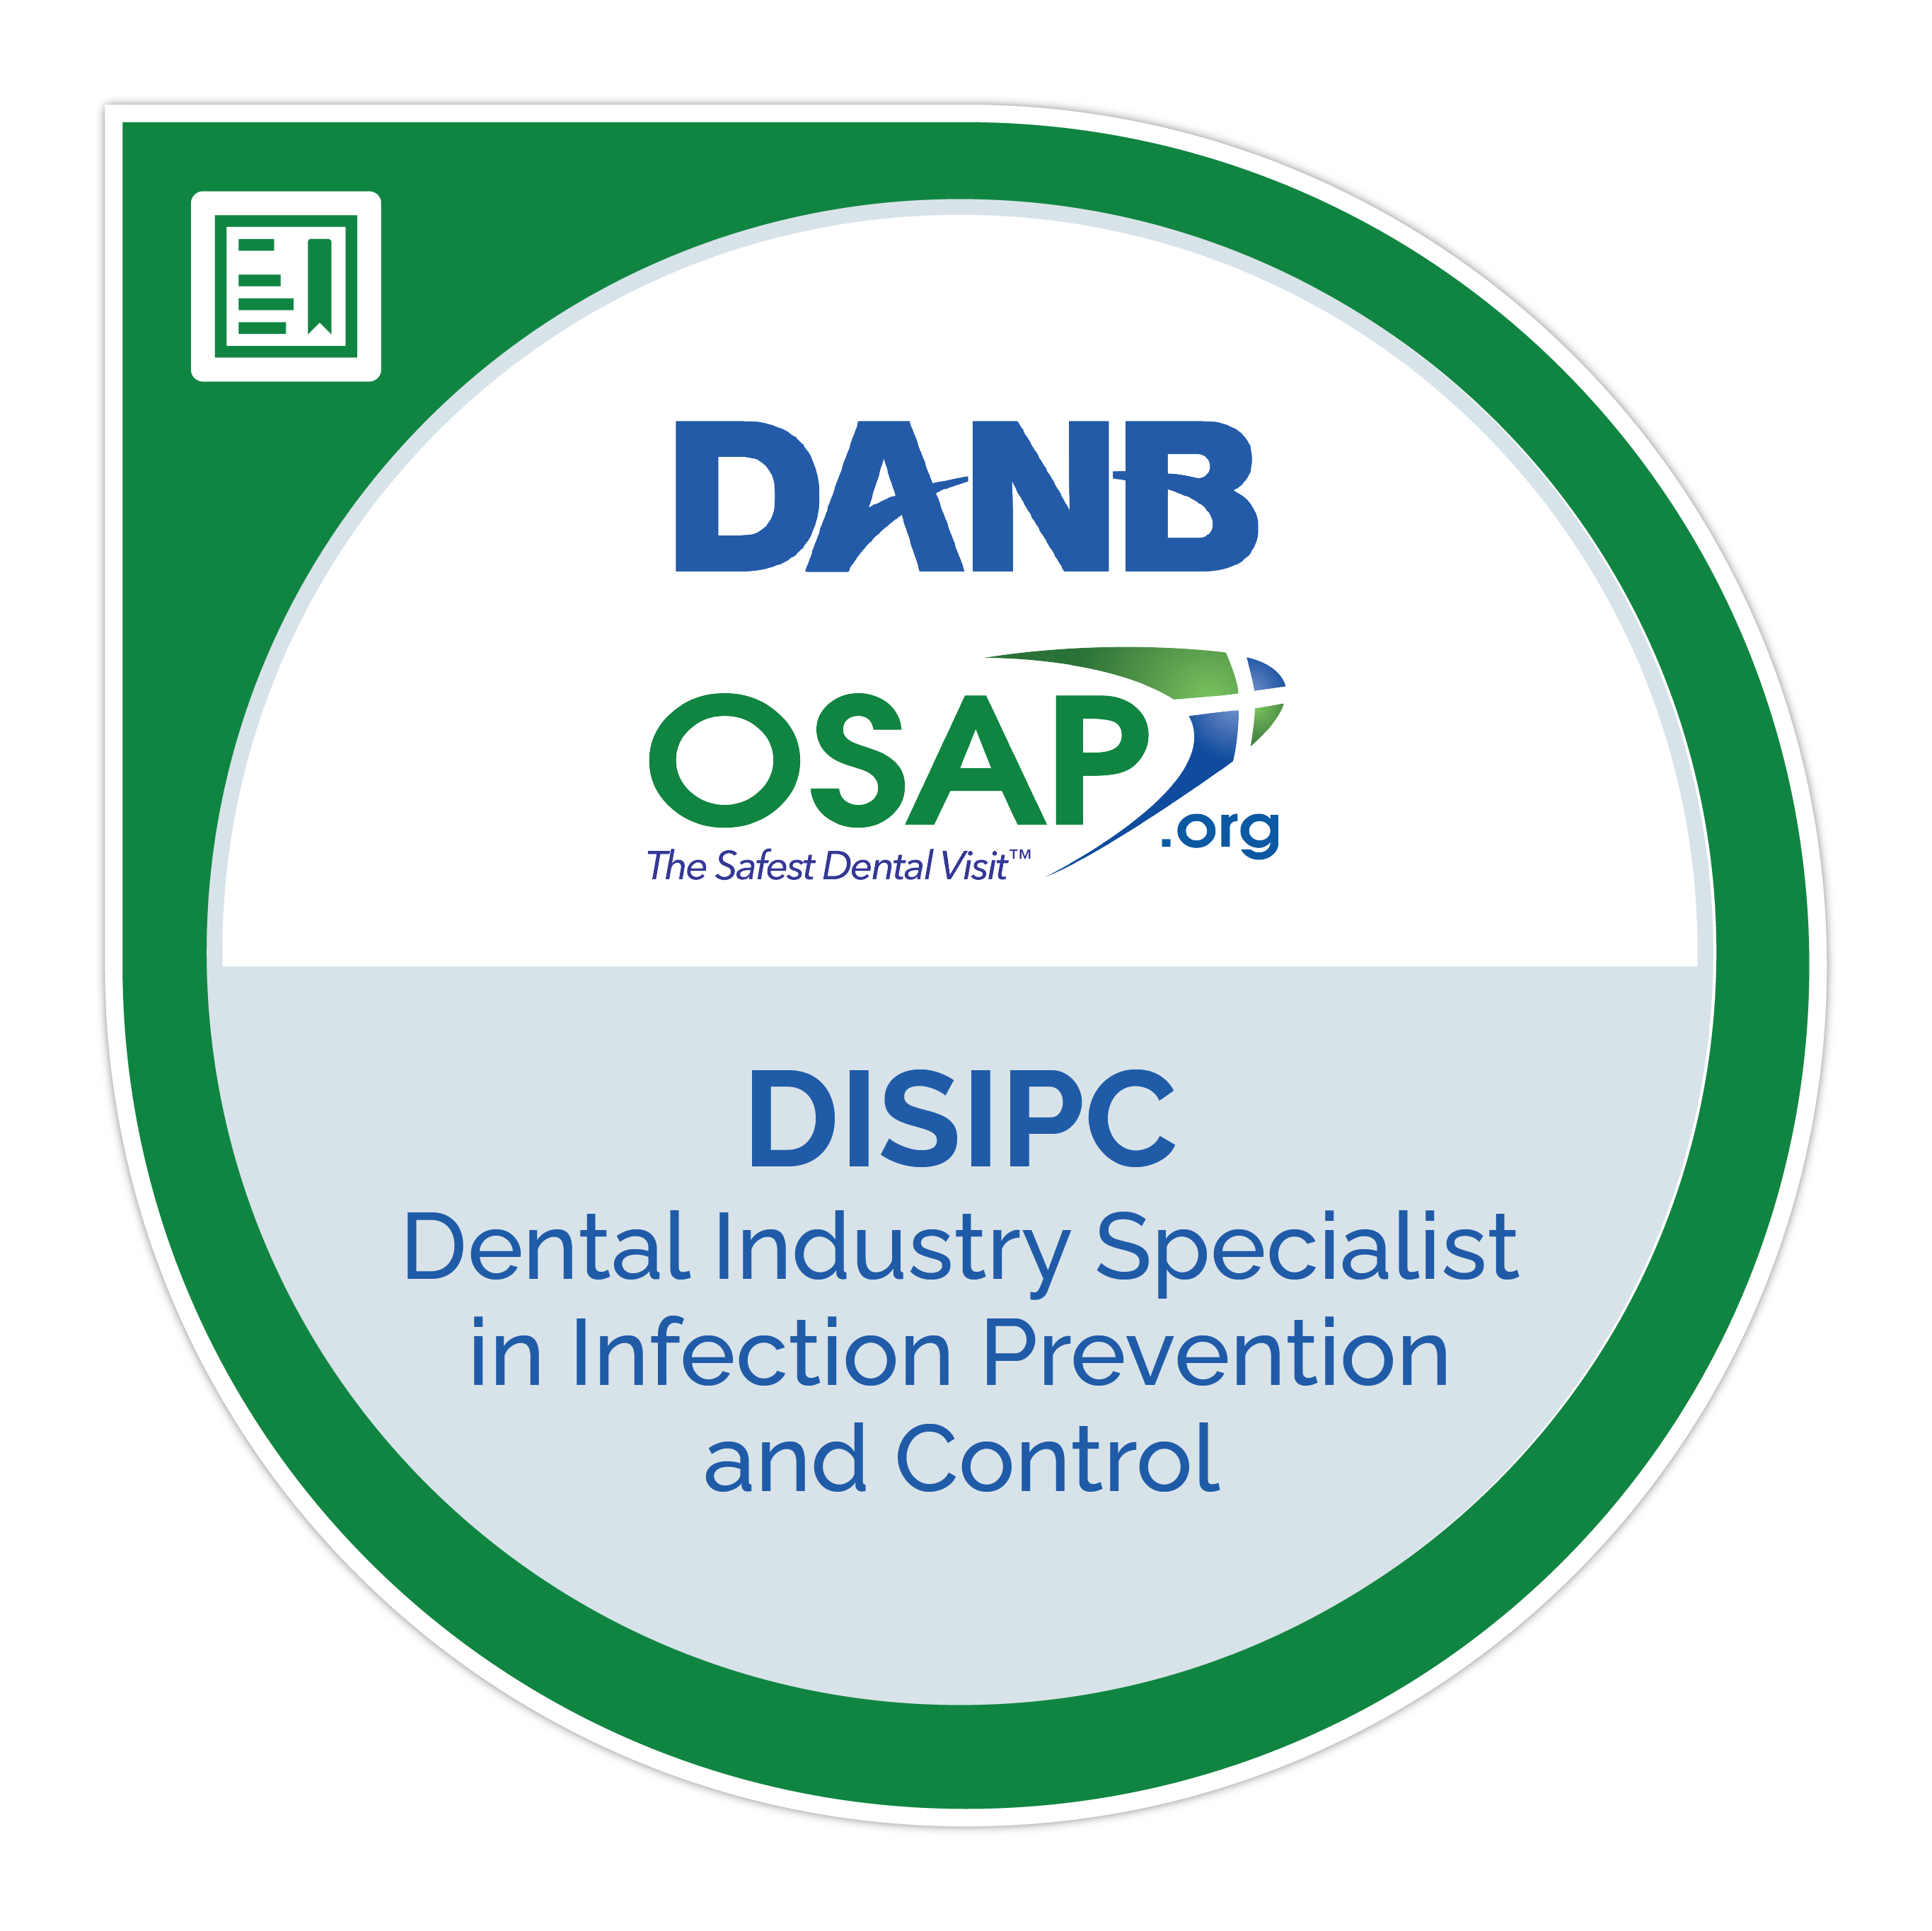 DISIPC - Dental Industry Specialist in Infection Prevention and Control